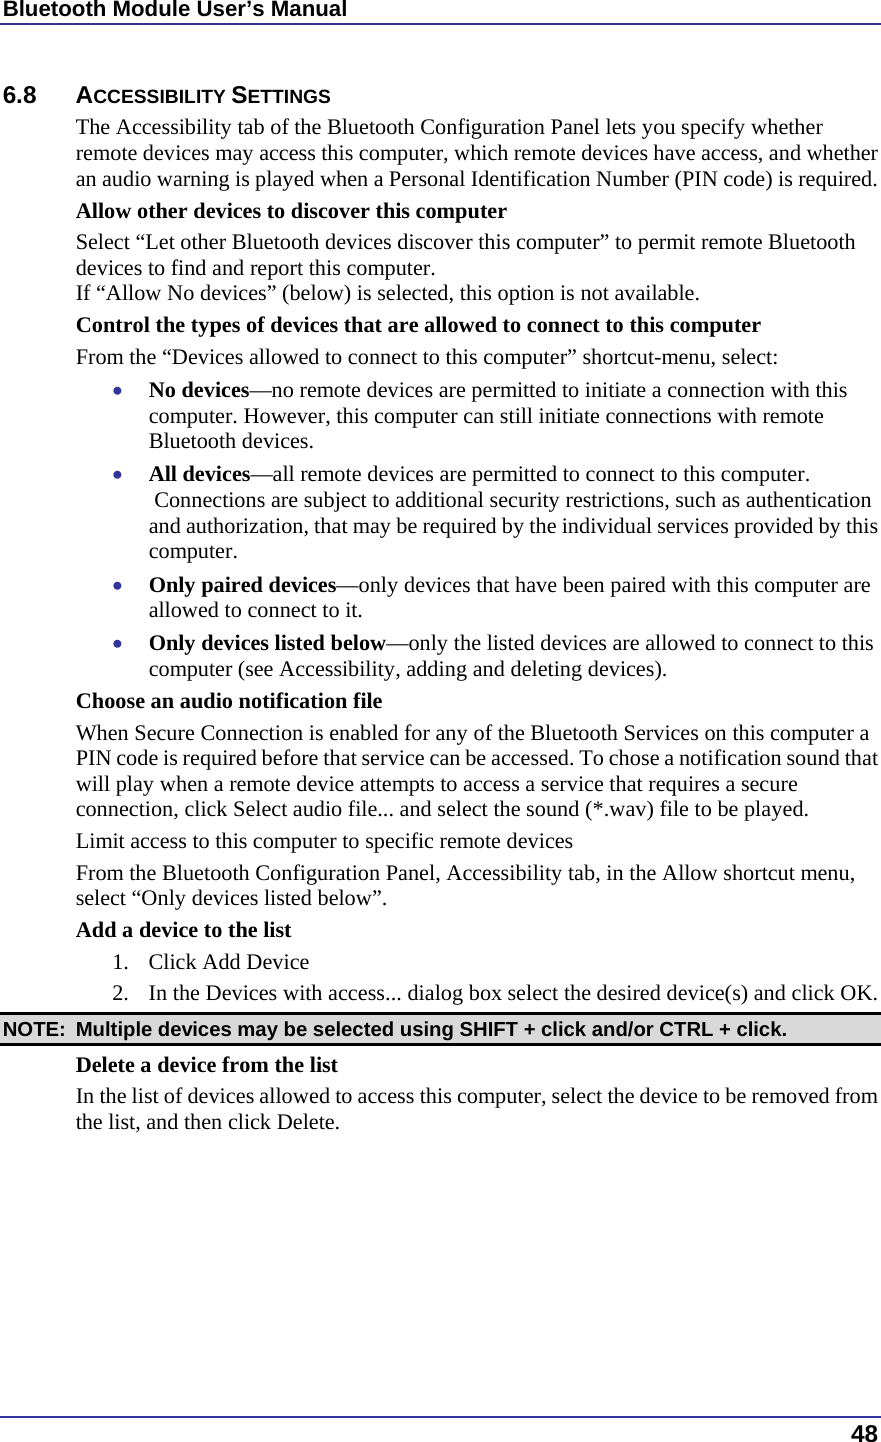 Bluetooth Module User’s Manual  48 6.8 ACCESSIBILITY SETTINGS The Accessibility tab of the Bluetooth Configuration Panel lets you specify whether remote devices may access this computer, which remote devices have access, and whether an audio warning is played when a Personal Identification Number (PIN code) is required. Allow other devices to discover this computer Select “Let other Bluetooth devices discover this computer” to permit remote Bluetooth devices to find and report this computer. If “Allow No devices” (below) is selected, this option is not available. Control the types of devices that are allowed to connect to this computer From the “Devices allowed to connect to this computer” shortcut-menu, select: •  No devices—no remote devices are permitted to initiate a connection with this computer. However, this computer can still initiate connections with remote Bluetooth devices. •  All devices—all remote devices are permitted to connect to this computer.  Connections are subject to additional security restrictions, such as authentication and authorization, that may be required by the individual services provided by this computer. •  Only paired devices—only devices that have been paired with this computer are allowed to connect to it. •  Only devices listed below—only the listed devices are allowed to connect to this computer (see Accessibility, adding and deleting devices). Choose an audio notification file When Secure Connection is enabled for any of the Bluetooth Services on this computer a PIN code is required before that service can be accessed. To chose a notification sound that will play when a remote device attempts to access a service that requires a secure connection, click Select audio file... and select the sound (*.wav) file to be played. Limit access to this computer to specific remote devices From the Bluetooth Configuration Panel, Accessibility tab, in the Allow shortcut menu, select “Only devices listed below”. Add a device to the list 1.  Click Add Device 2.  In the Devices with access... dialog box select the desired device(s) and click OK.  NOTE:  Multiple devices may be selected using SHIFT + click and/or CTRL + click. Delete a device from the list In the list of devices allowed to access this computer, select the device to be removed from the list, and then click Delete.  